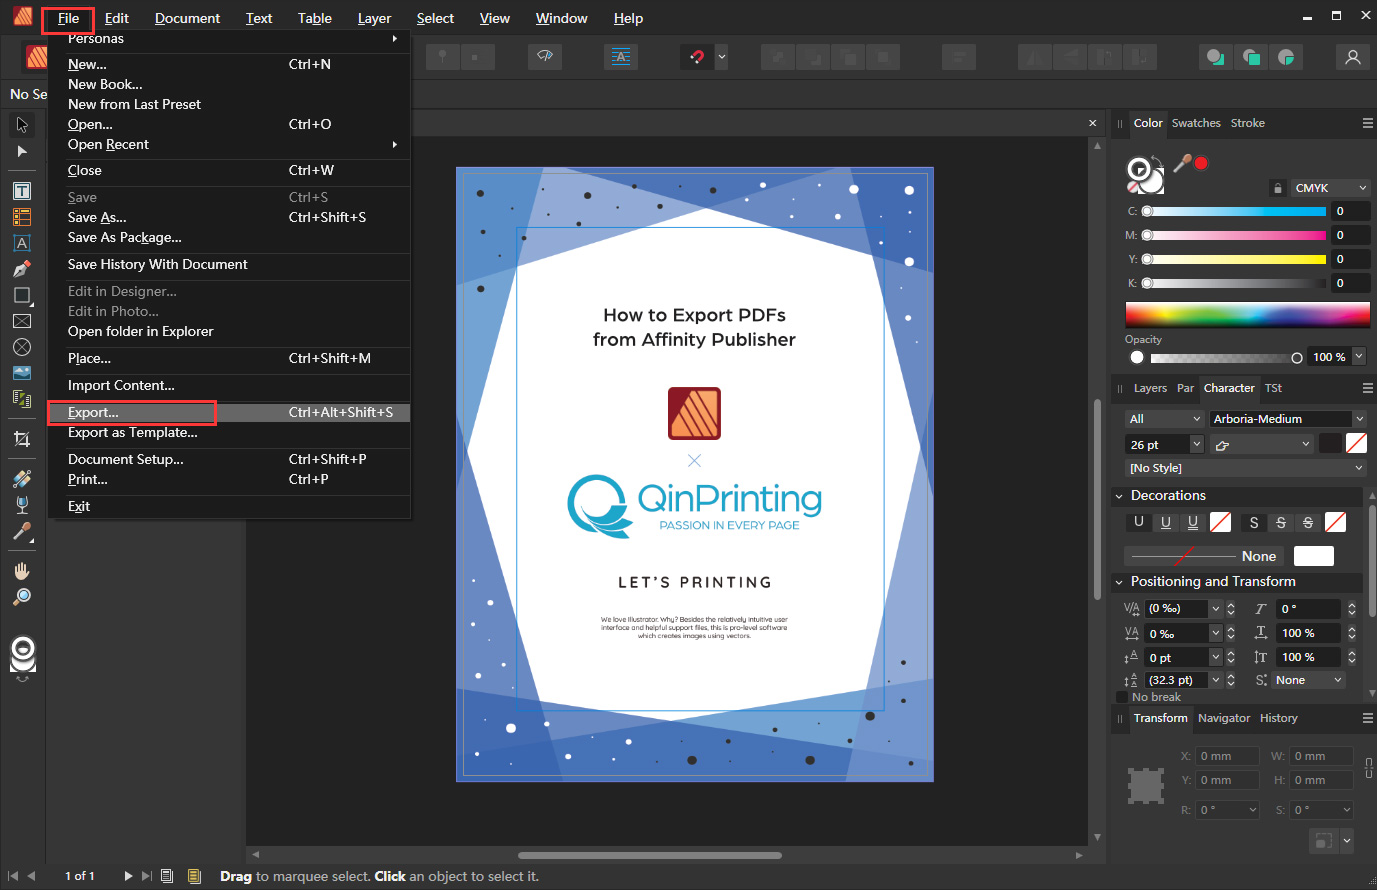 How to Export PDFs from Affinity Publisher Step 1